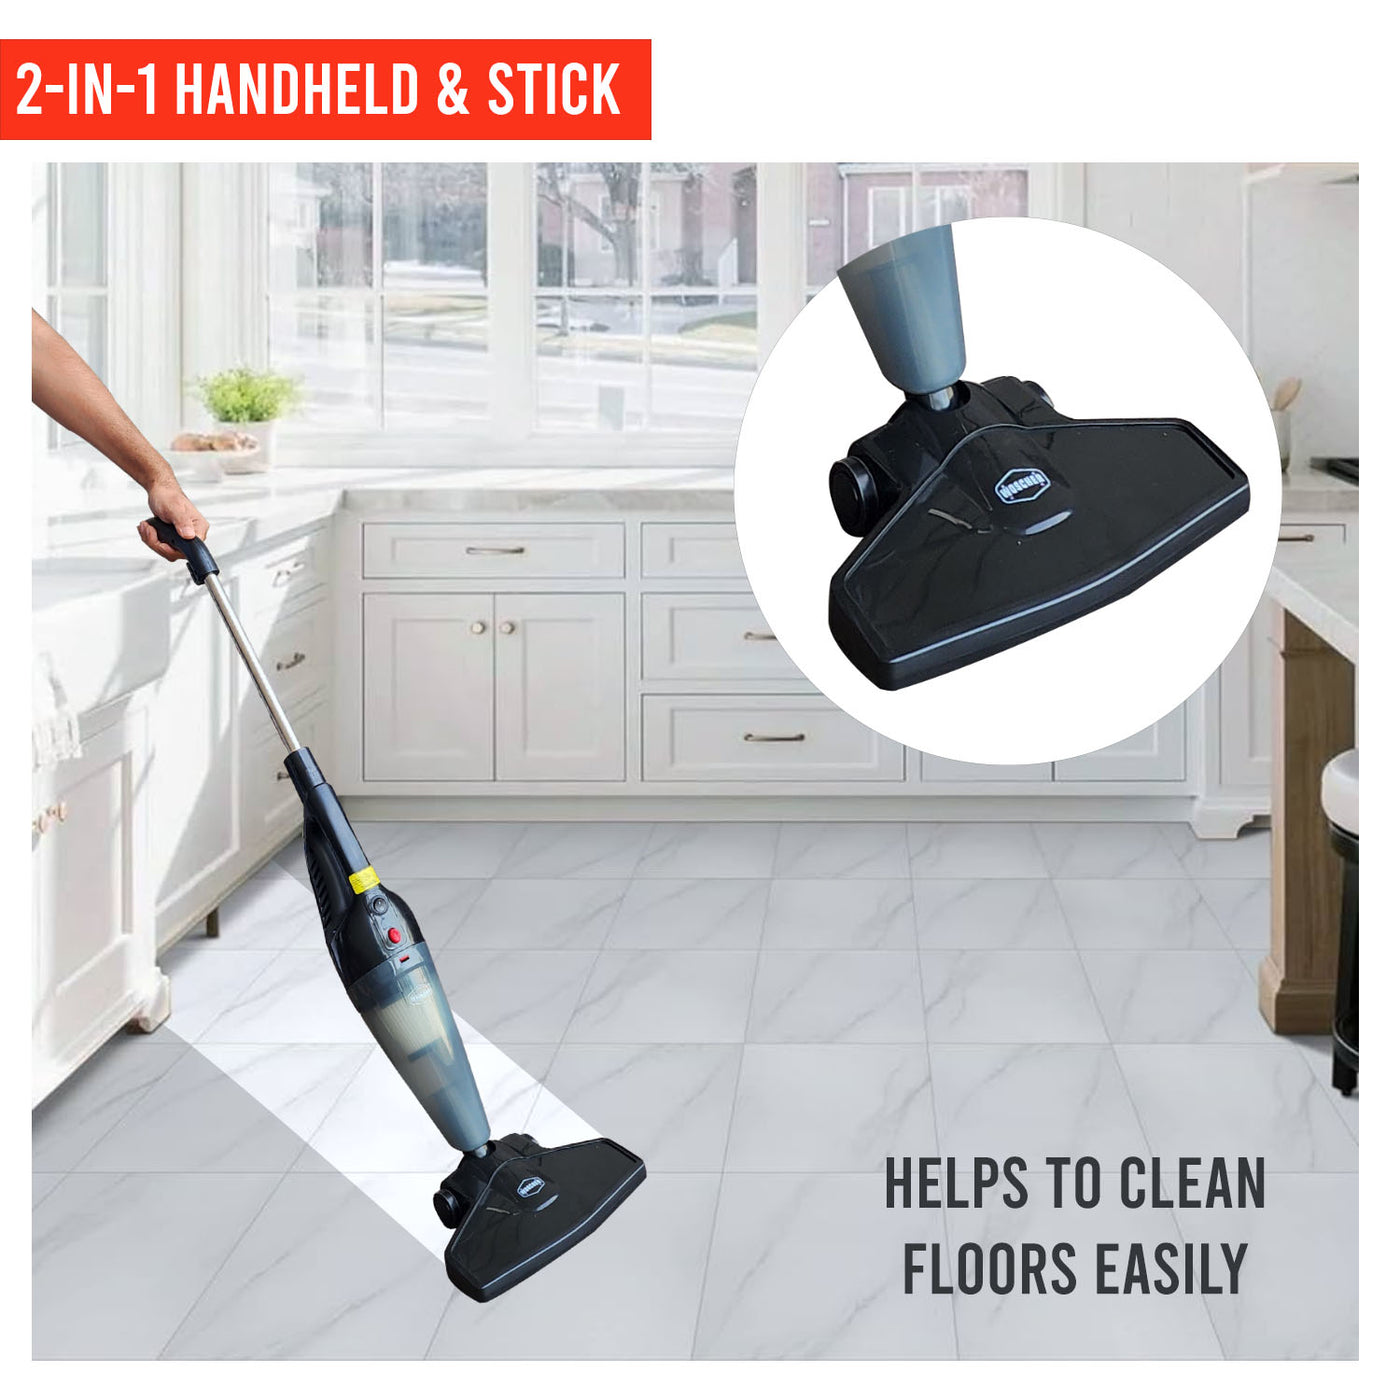 WOSCHER 908K 2in1 Vacuum Cleaner Handheld with Stick & Floor Brush|800 Watts|17kPA Suction Power| Handheld Vacuum Cleaner, for Multi Purpose Home & Car Cleaning|1 LTR Capacity| 2 Year Warranty